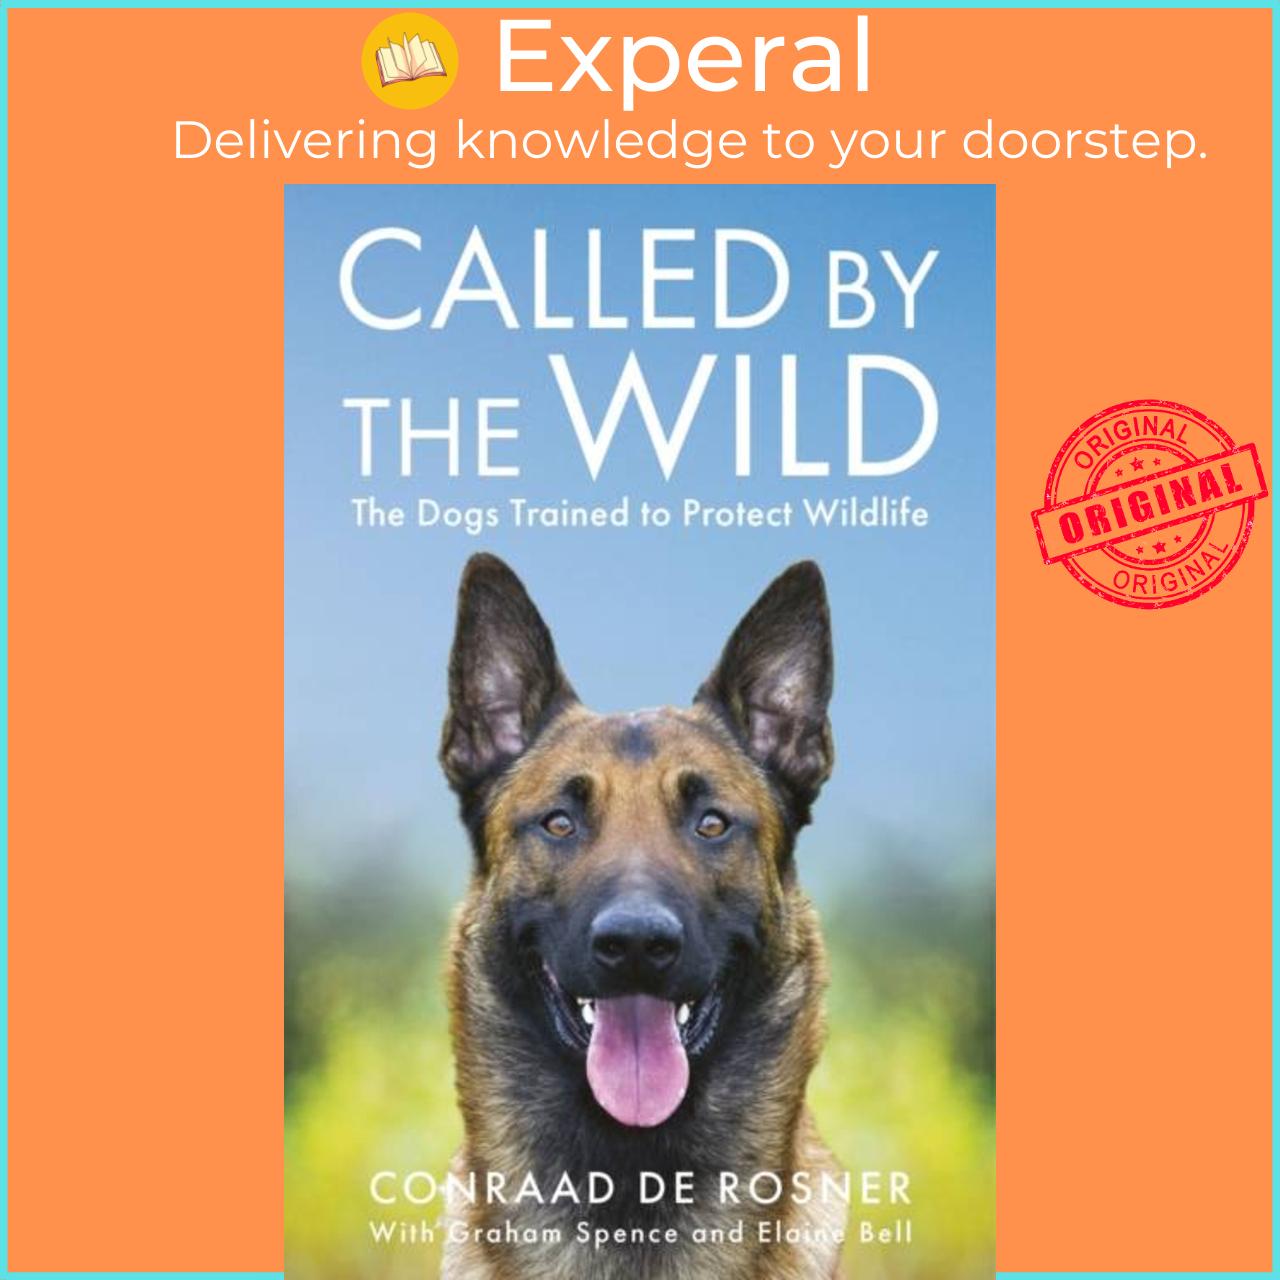 Sách - Called by the Wild - The Dogs Trained to Protect Wildlife by Conraad de Rosner (UK edition, paperback)